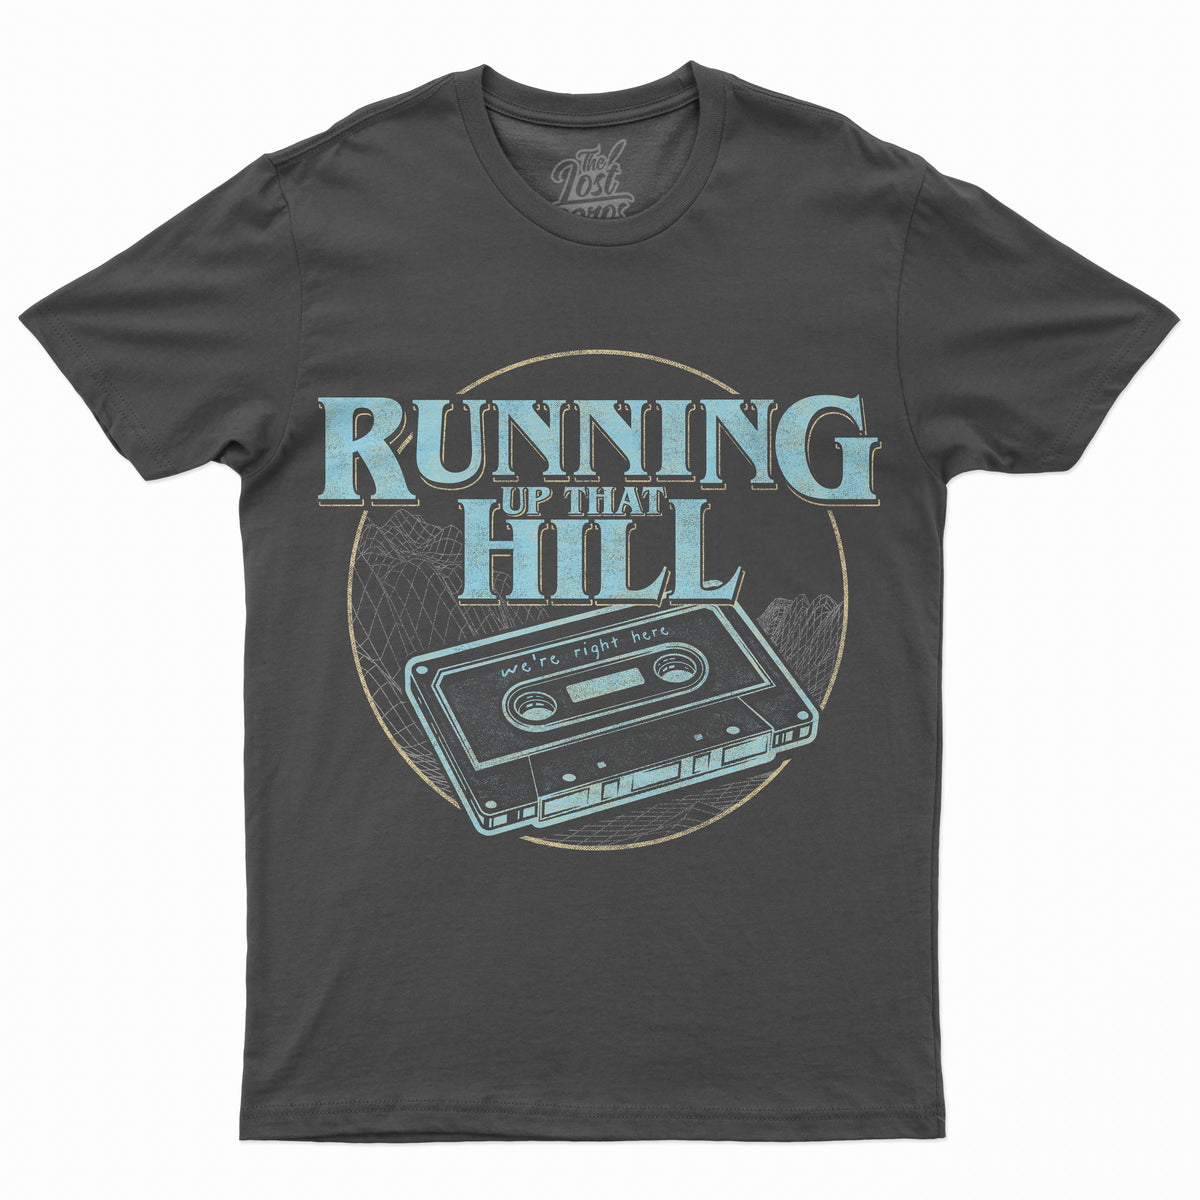 The Lost Bros Running Up That Hill Tee